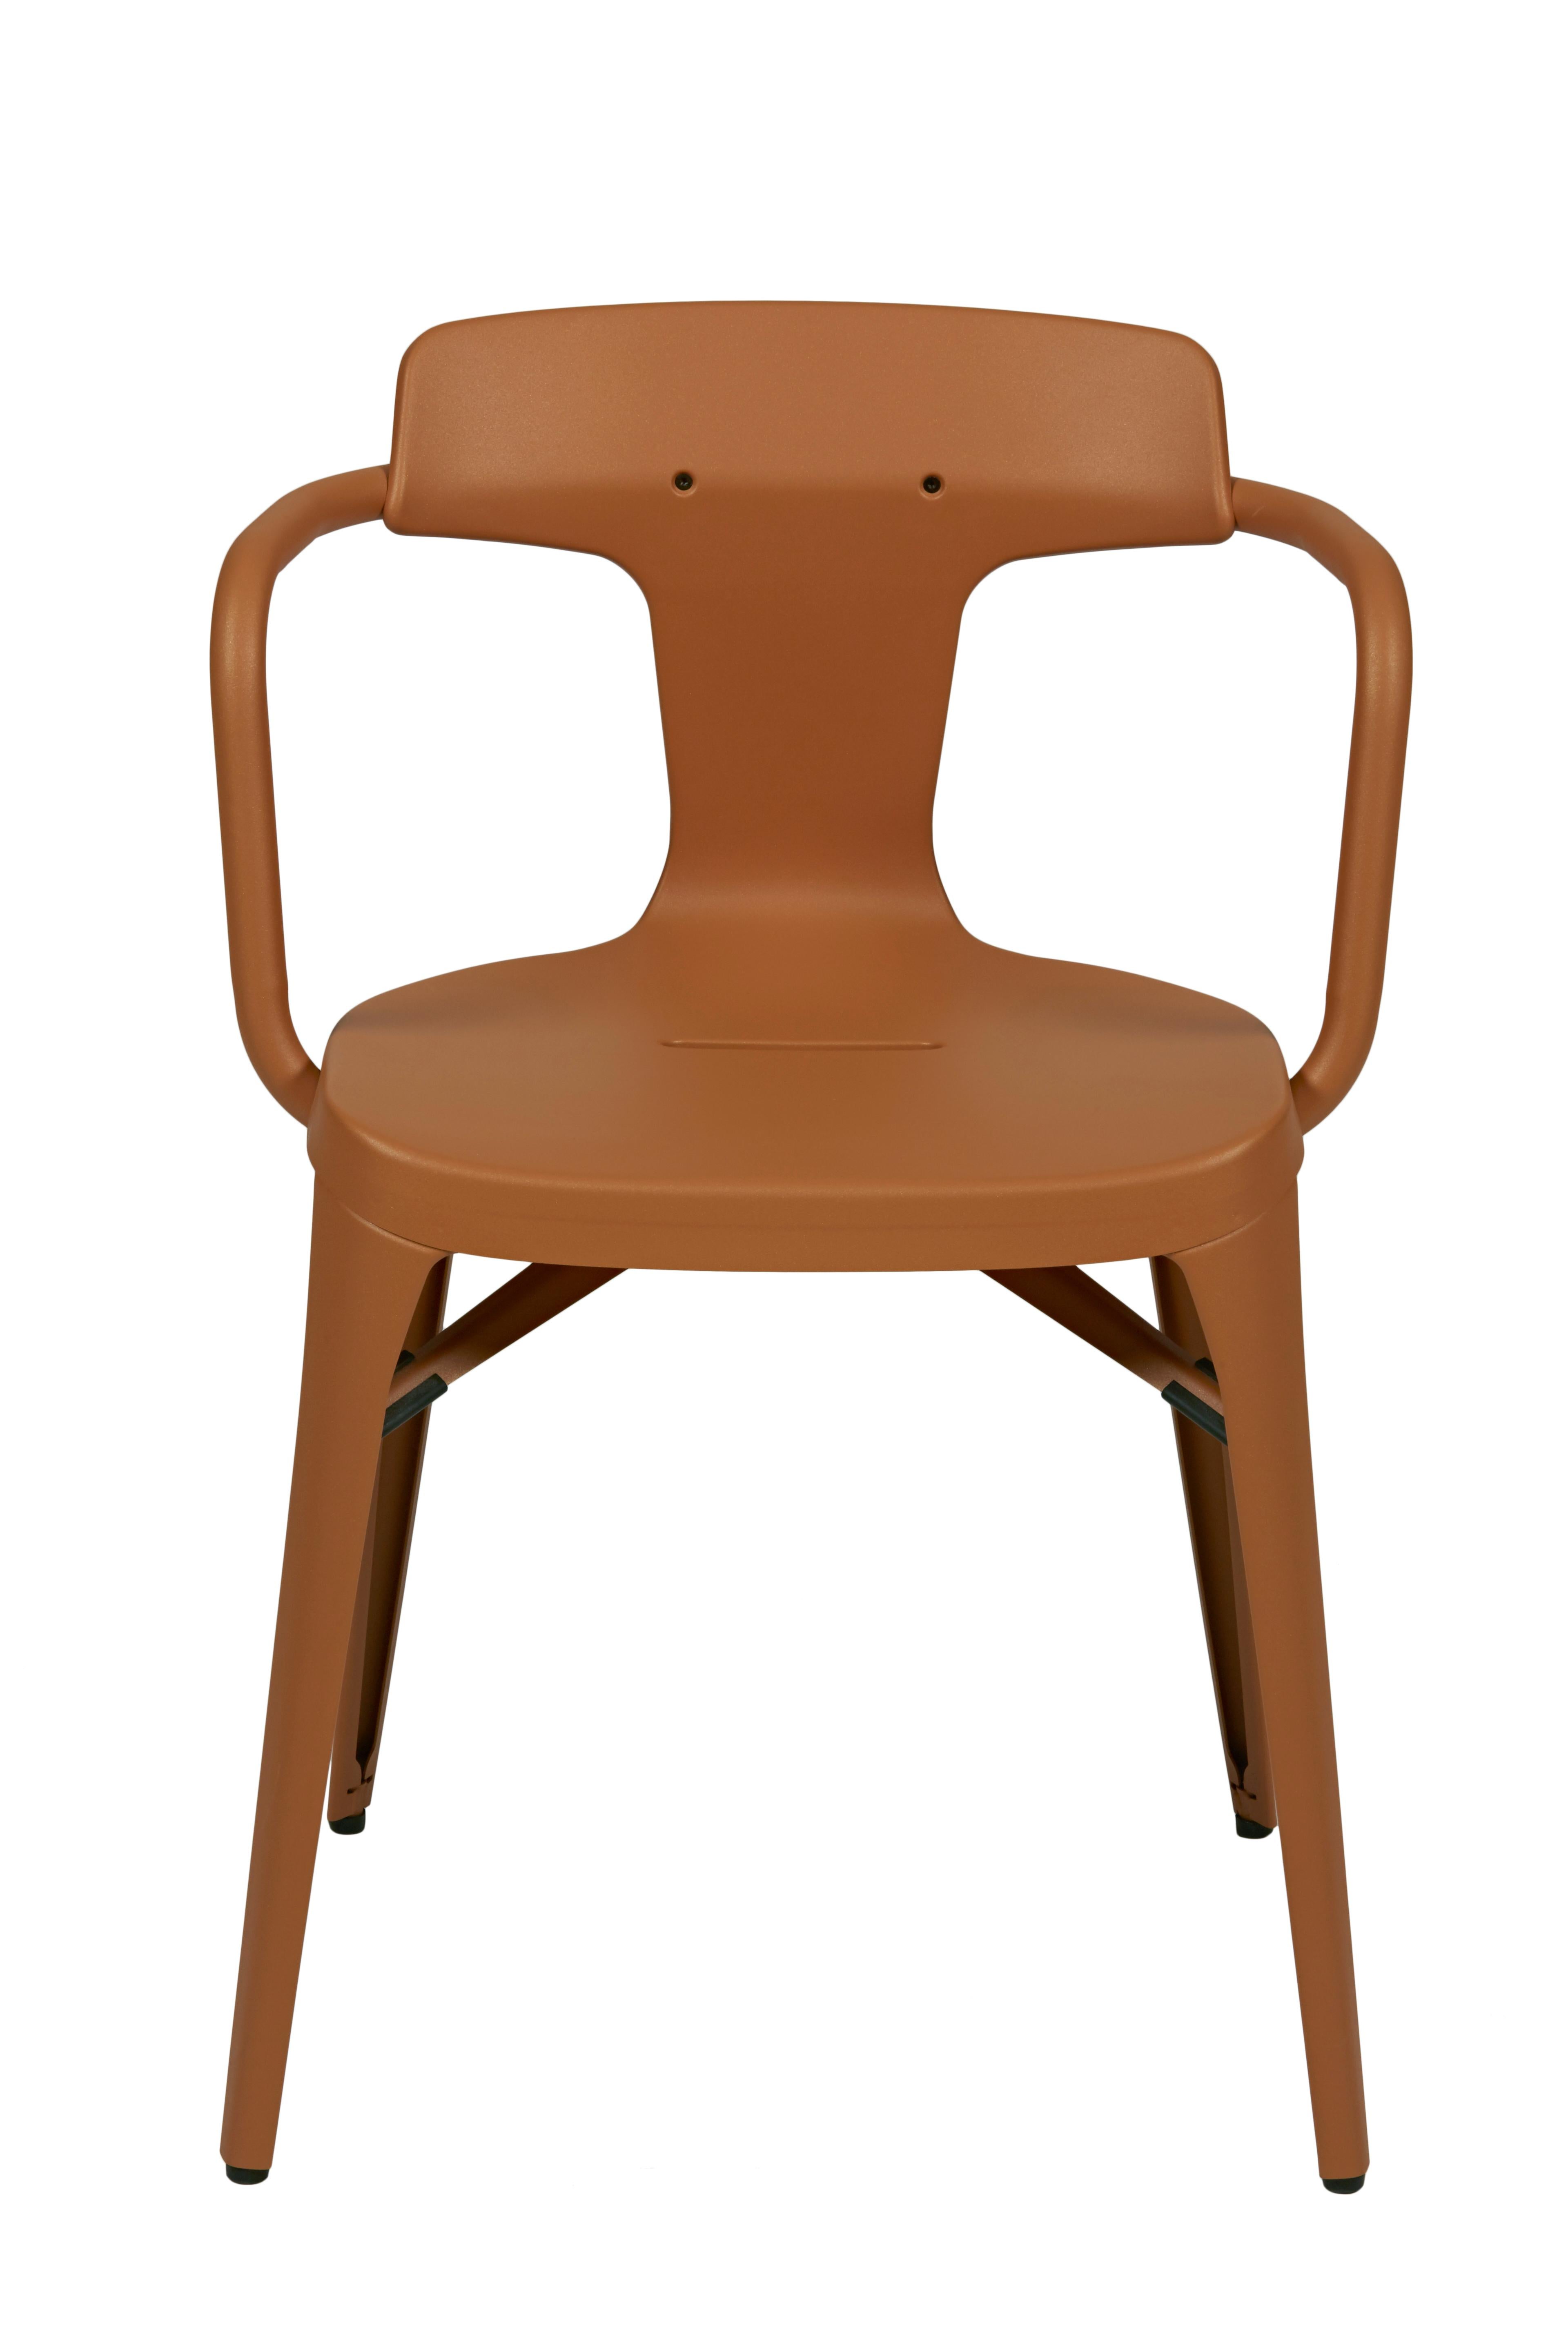 Im Angebot: T14 Chair in Pop Colors by Patrick Norguet and Tolix, Orange (Terracotta)